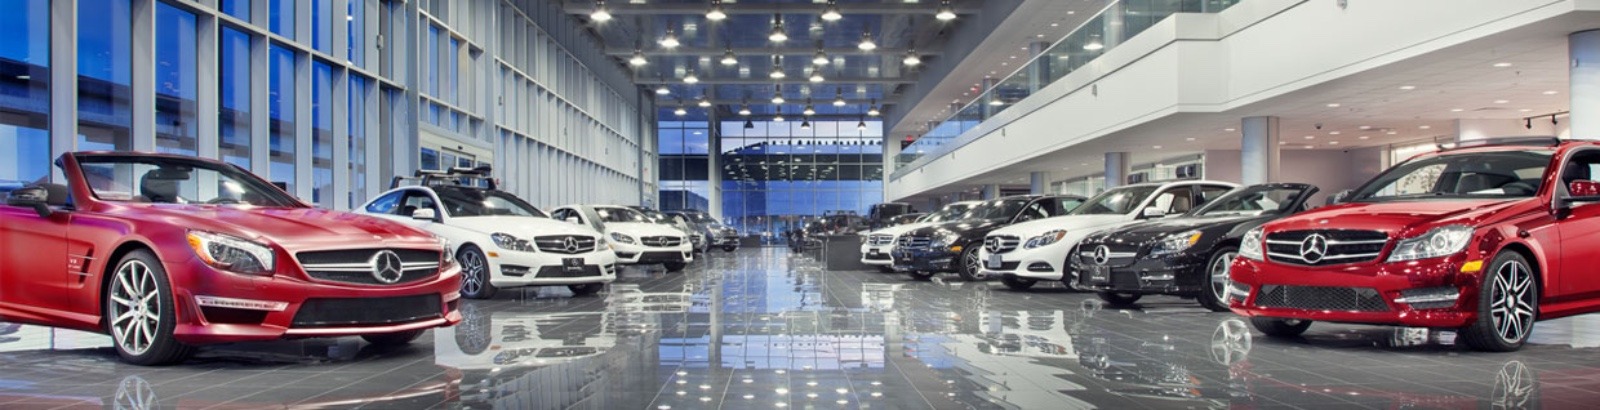 Robertson-Walls-Ceilings-Completed-Projects-Luxury-Car-Dealerships-Mercedes-Benz-Vancouver-3 Mercedes-Benz Vancouver